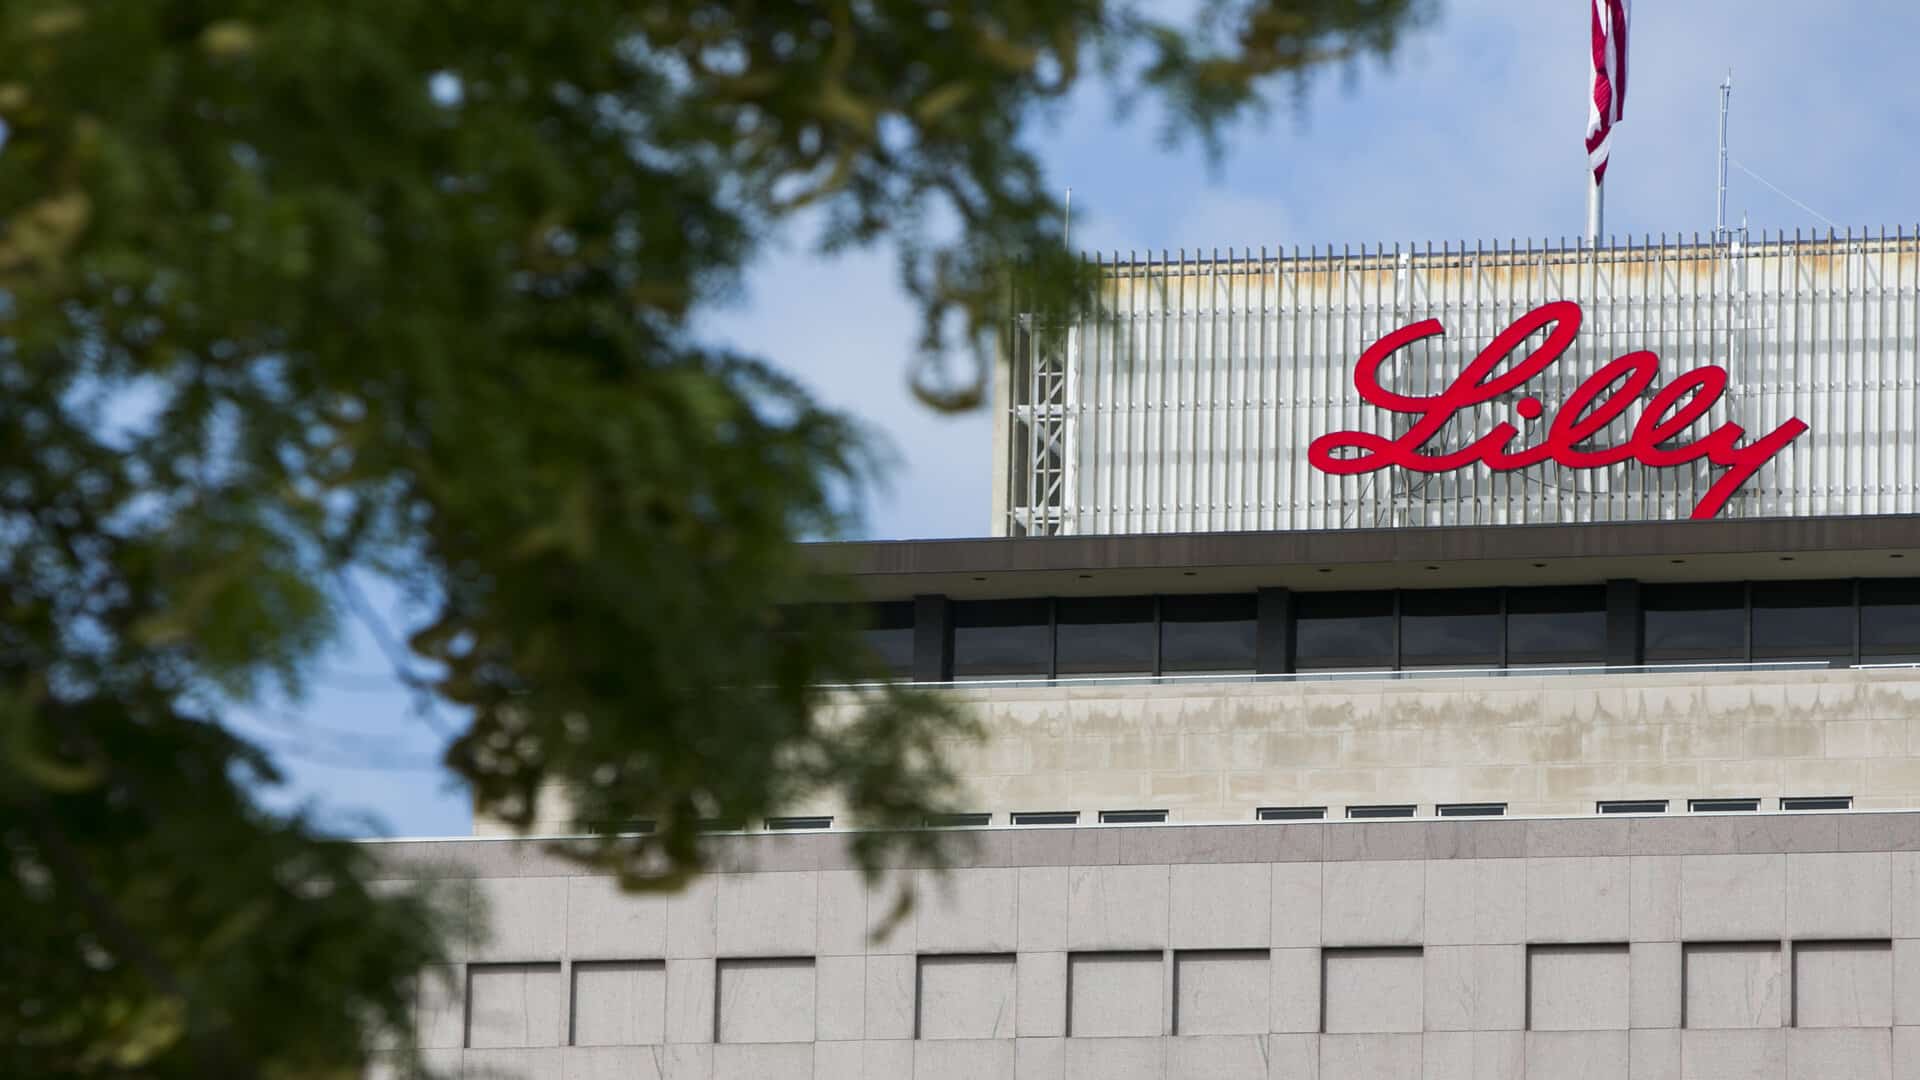 Cipla India seals deal with Eli Lilly to sell Trulicity and Humalog products for diabetes treatments